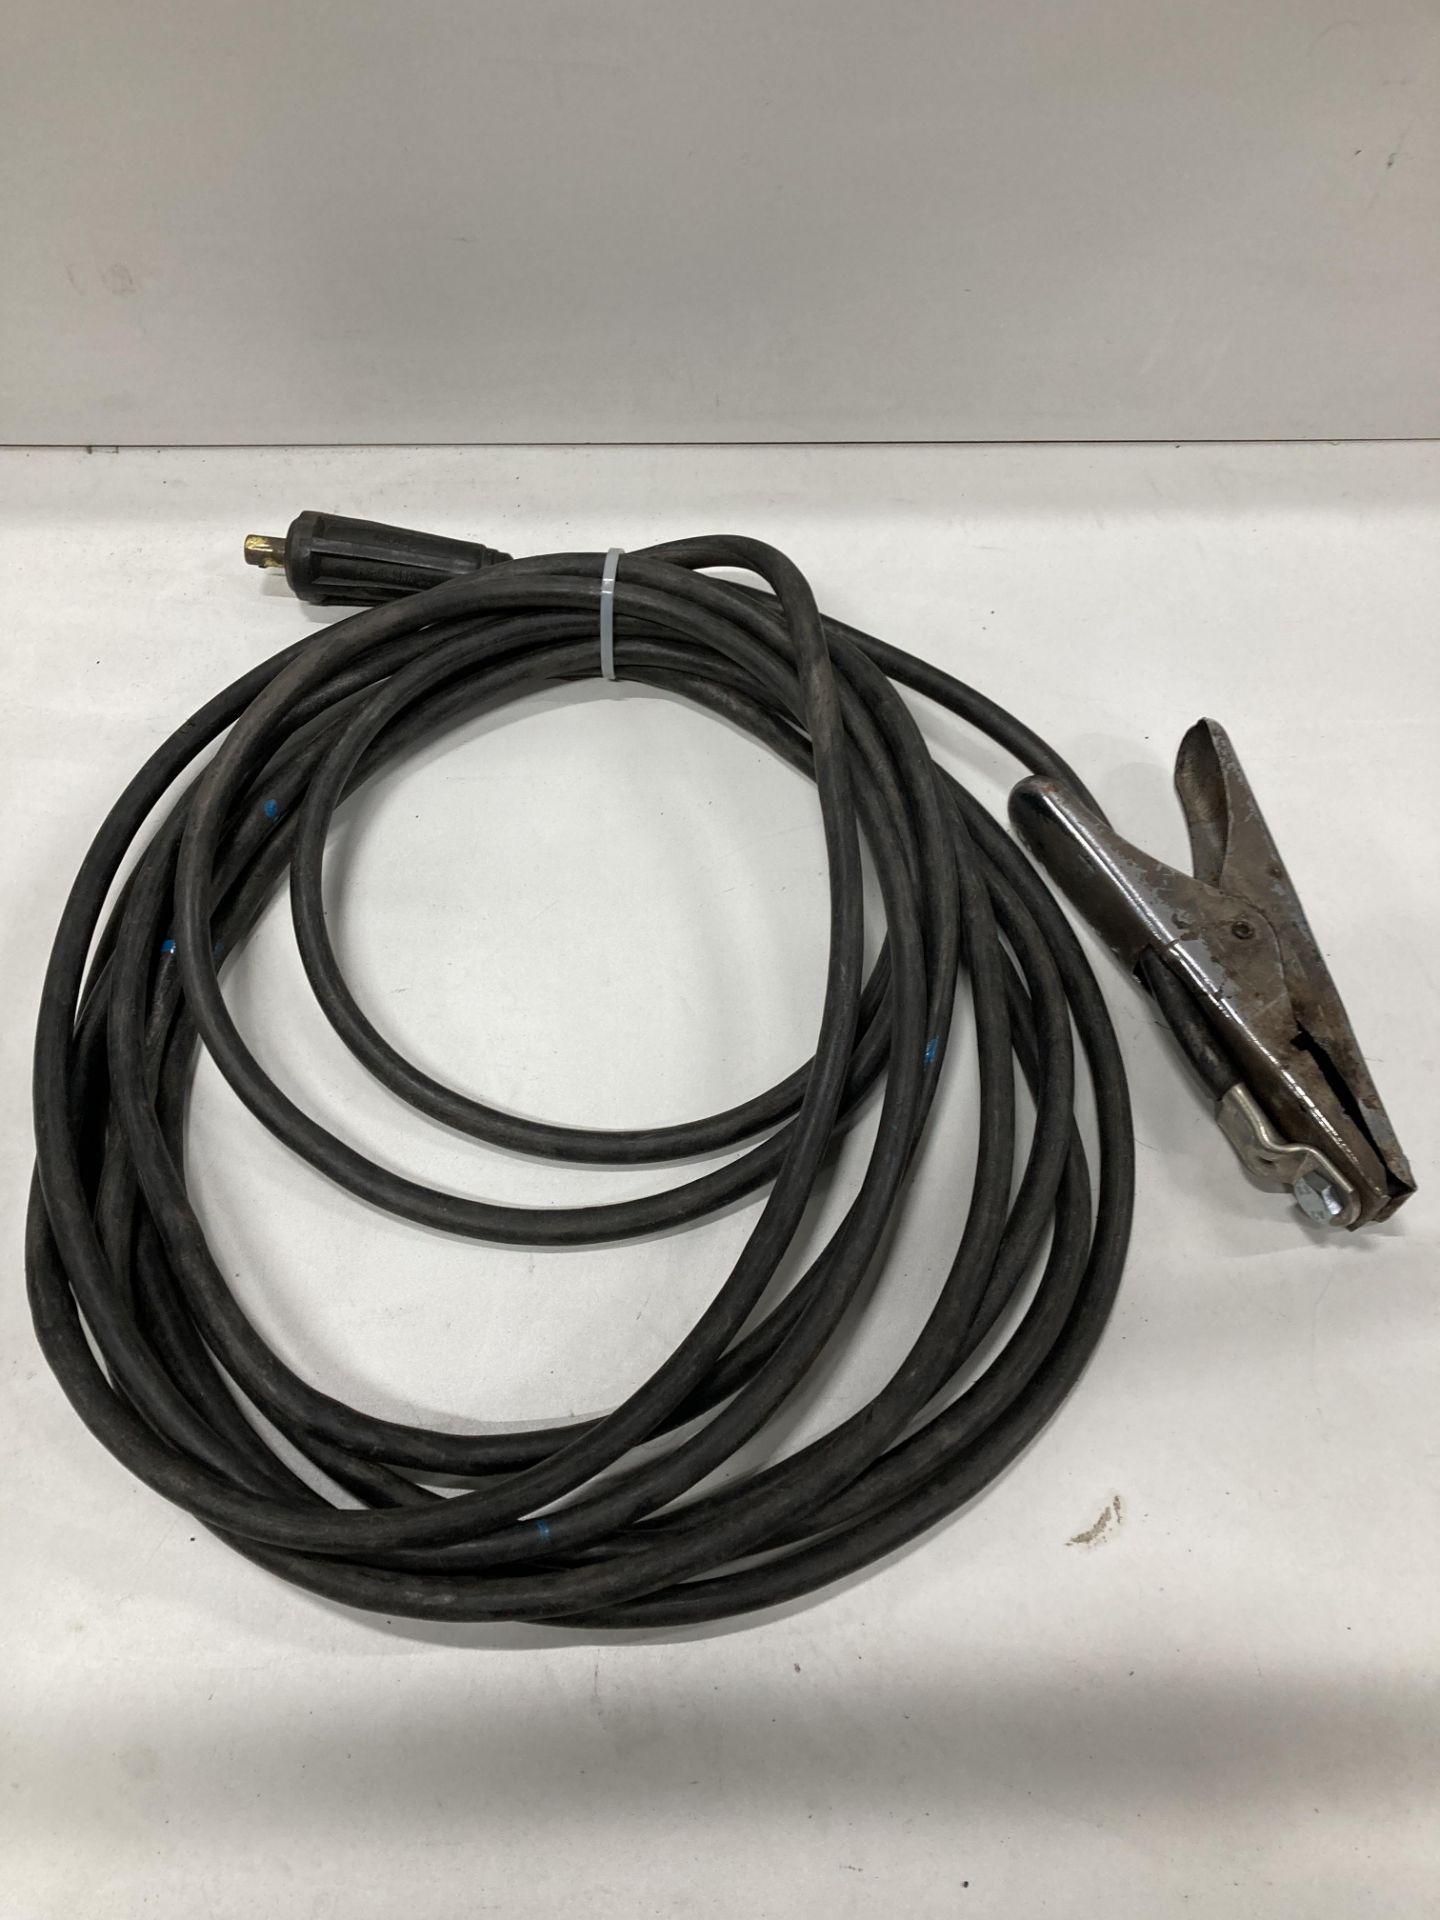 5 x Welding Earth Clamp Cables - As Pictured - Image 3 of 5